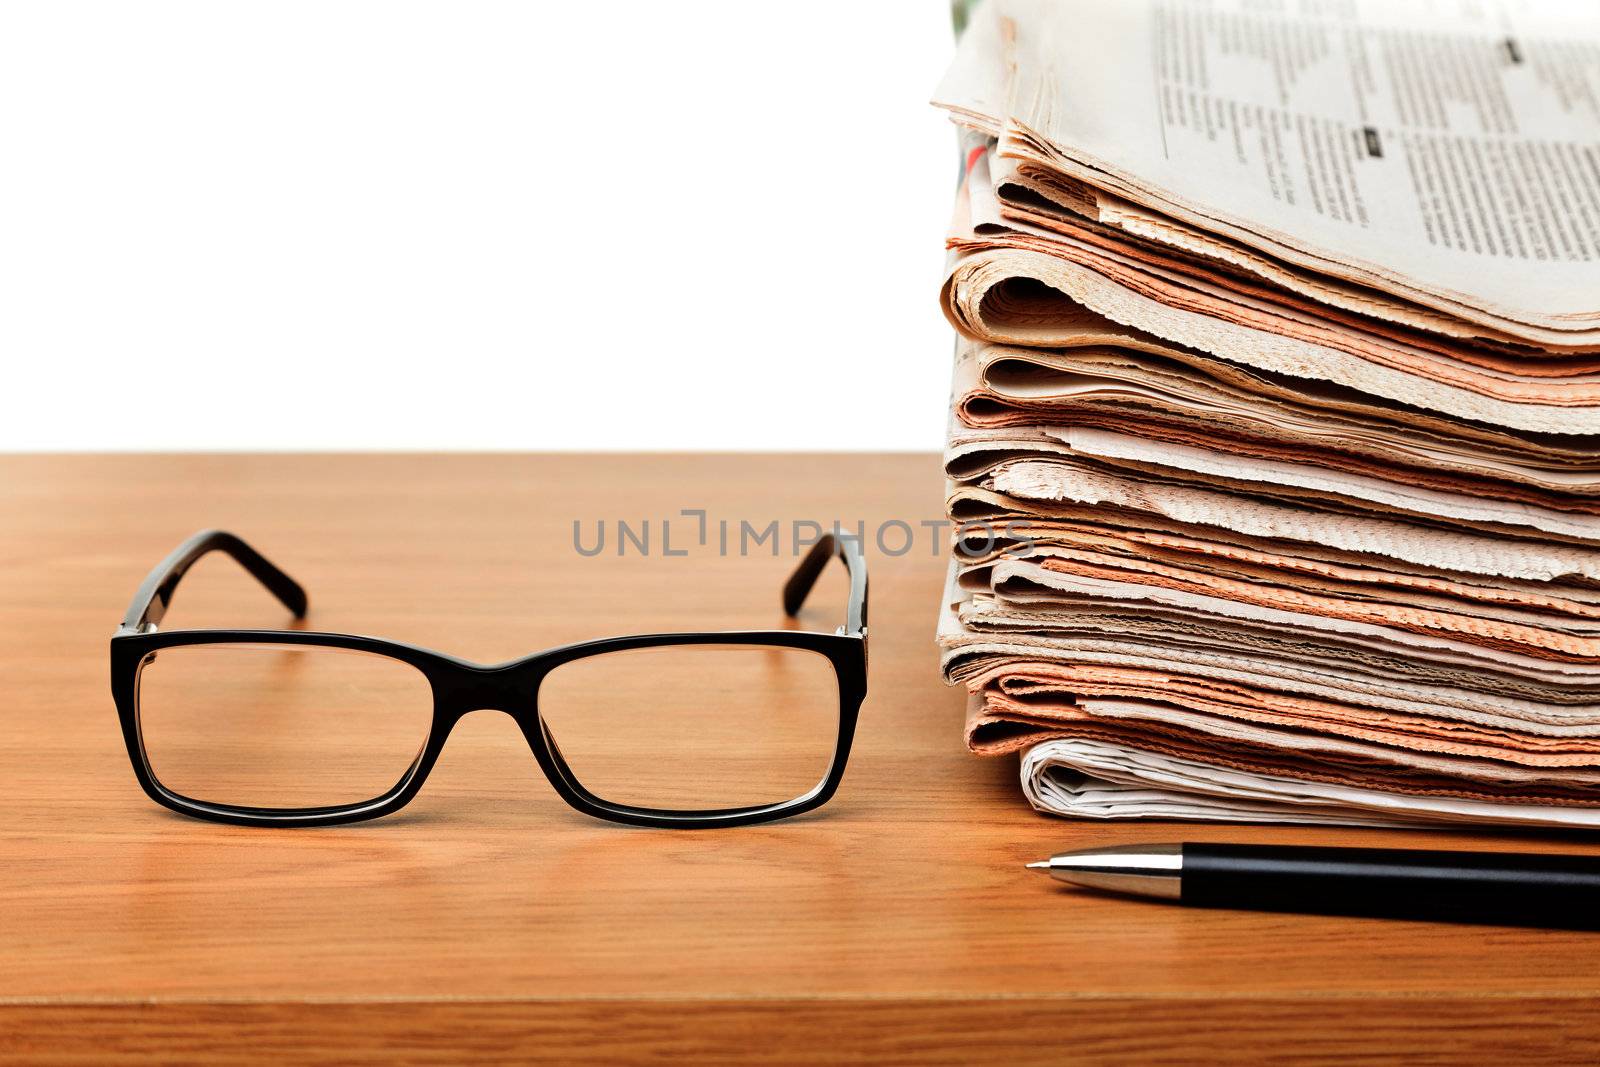 Glasses and newspapers by naumoid